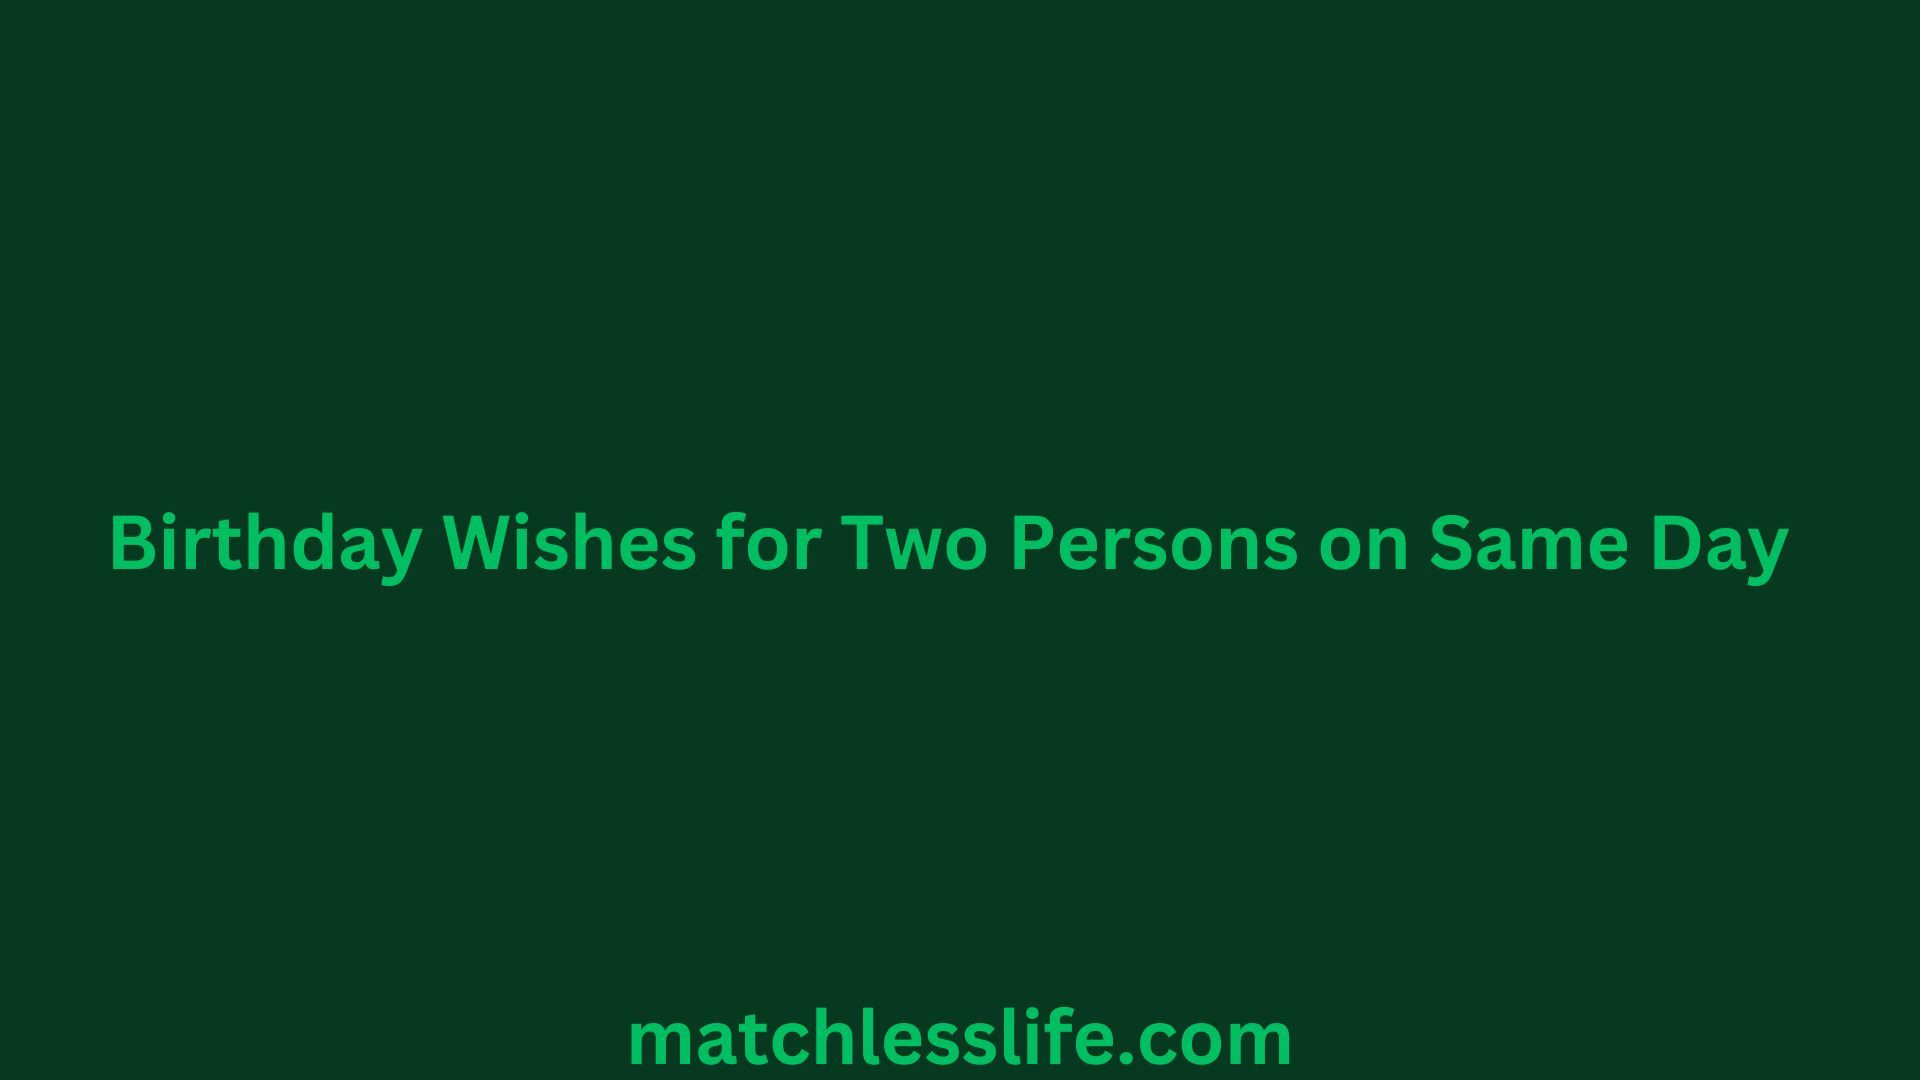 Birthday Wishes for Two Persons on Same Day